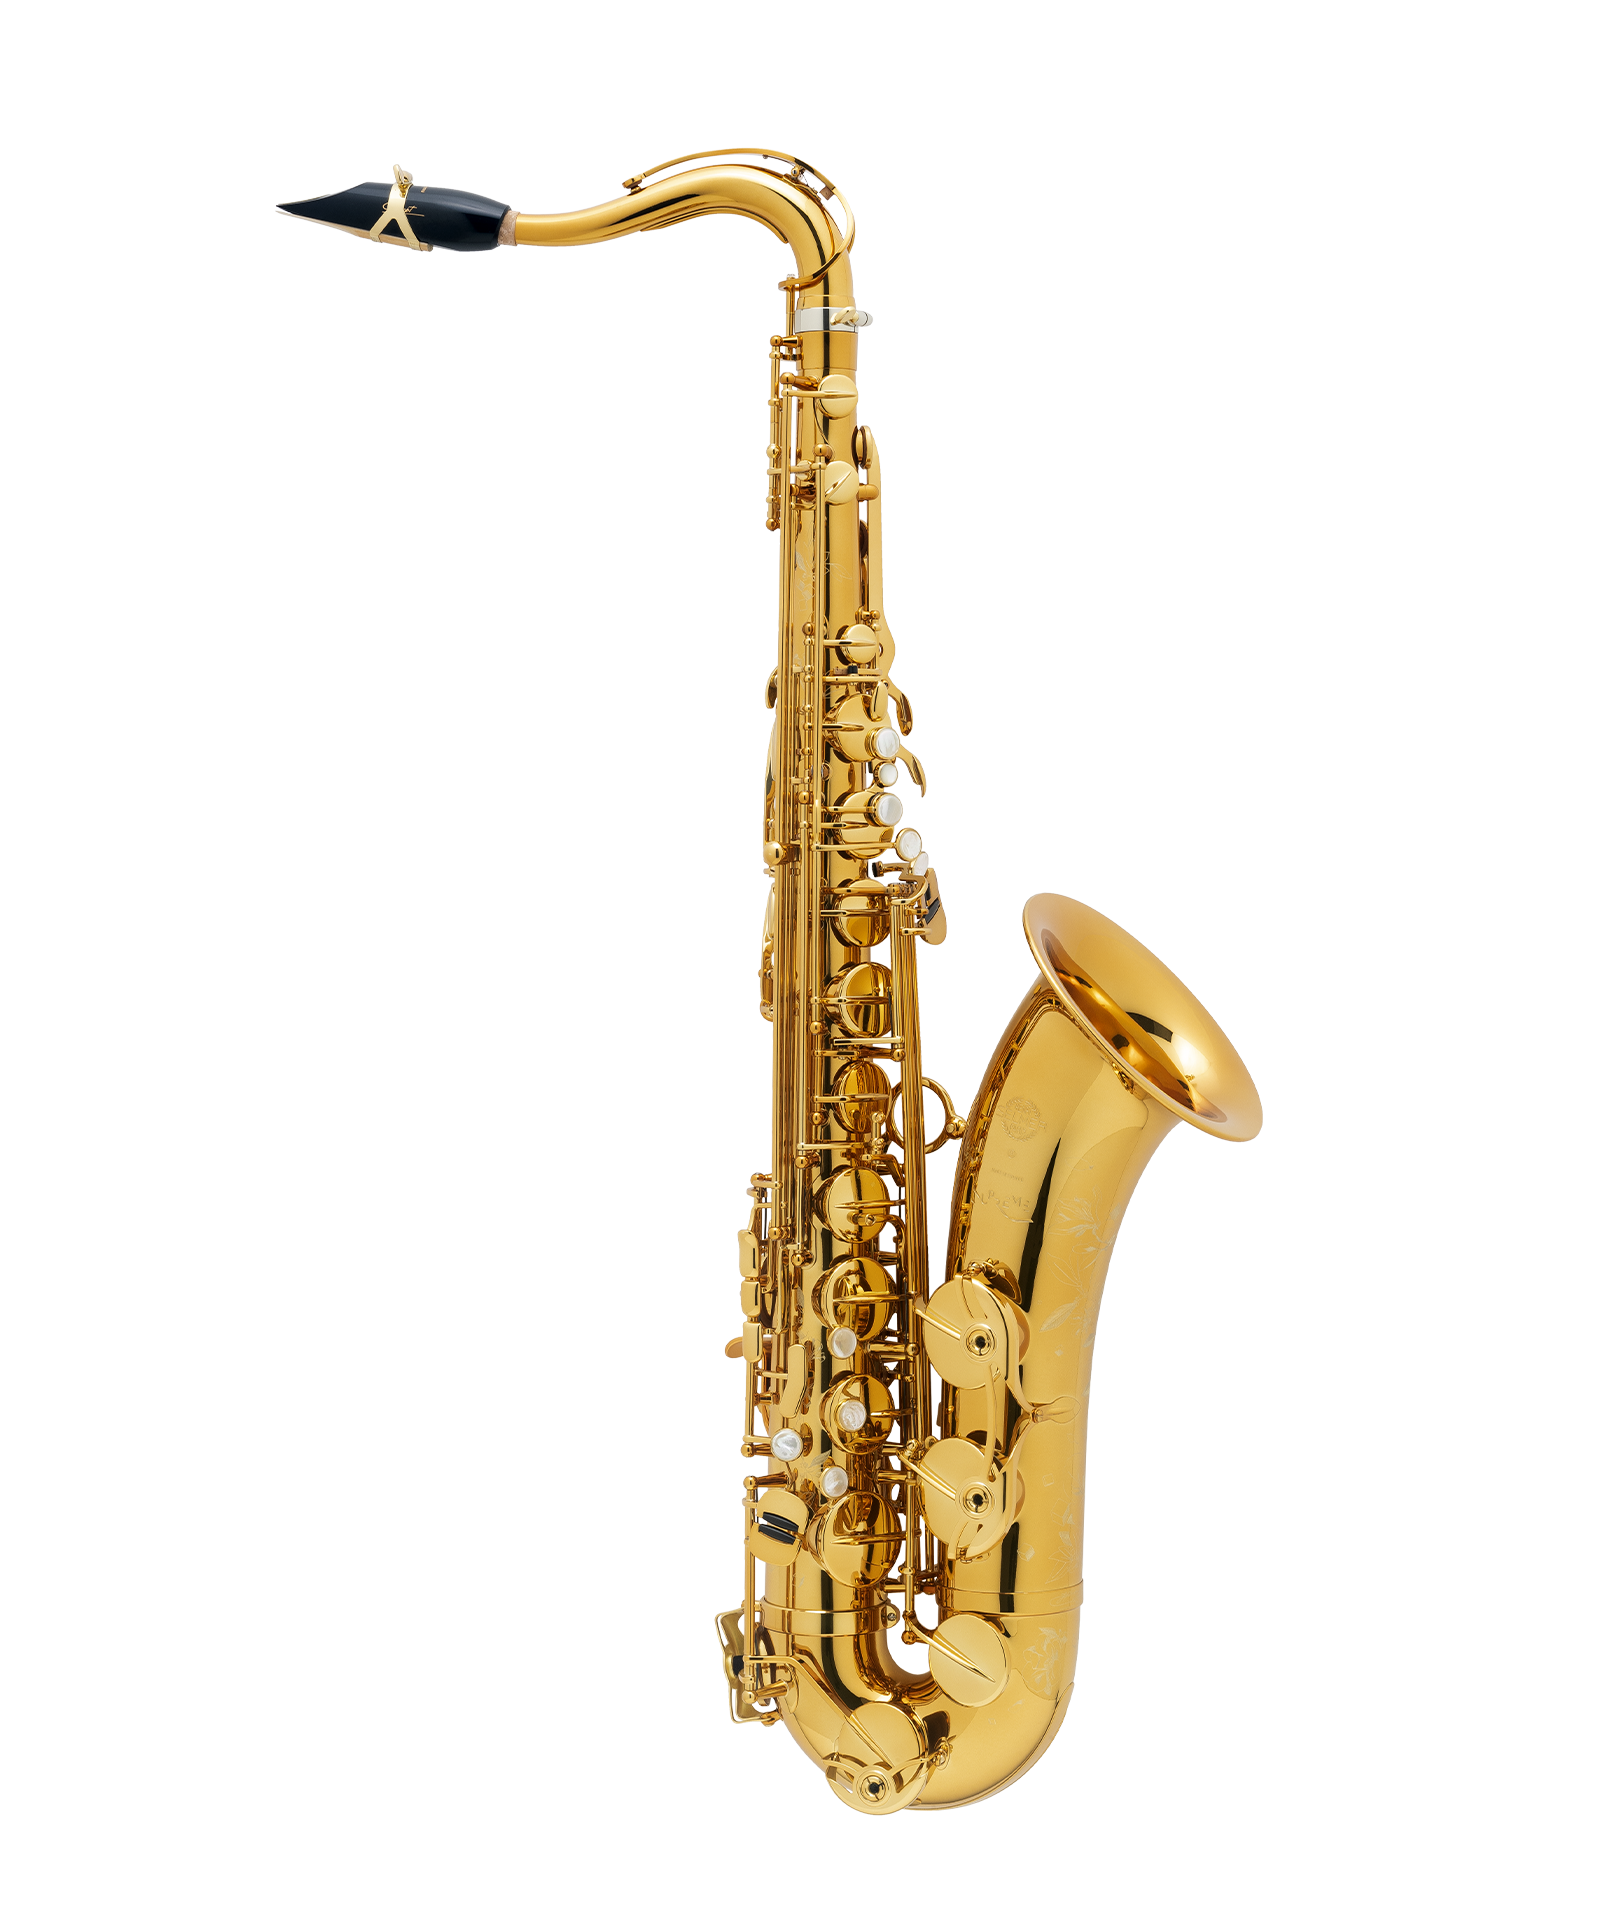 https://loudandproudrecords.com/wp-content/uploads/2023/09/is-the-saxophone-a-woodwind-or-a-brass-instrument.png